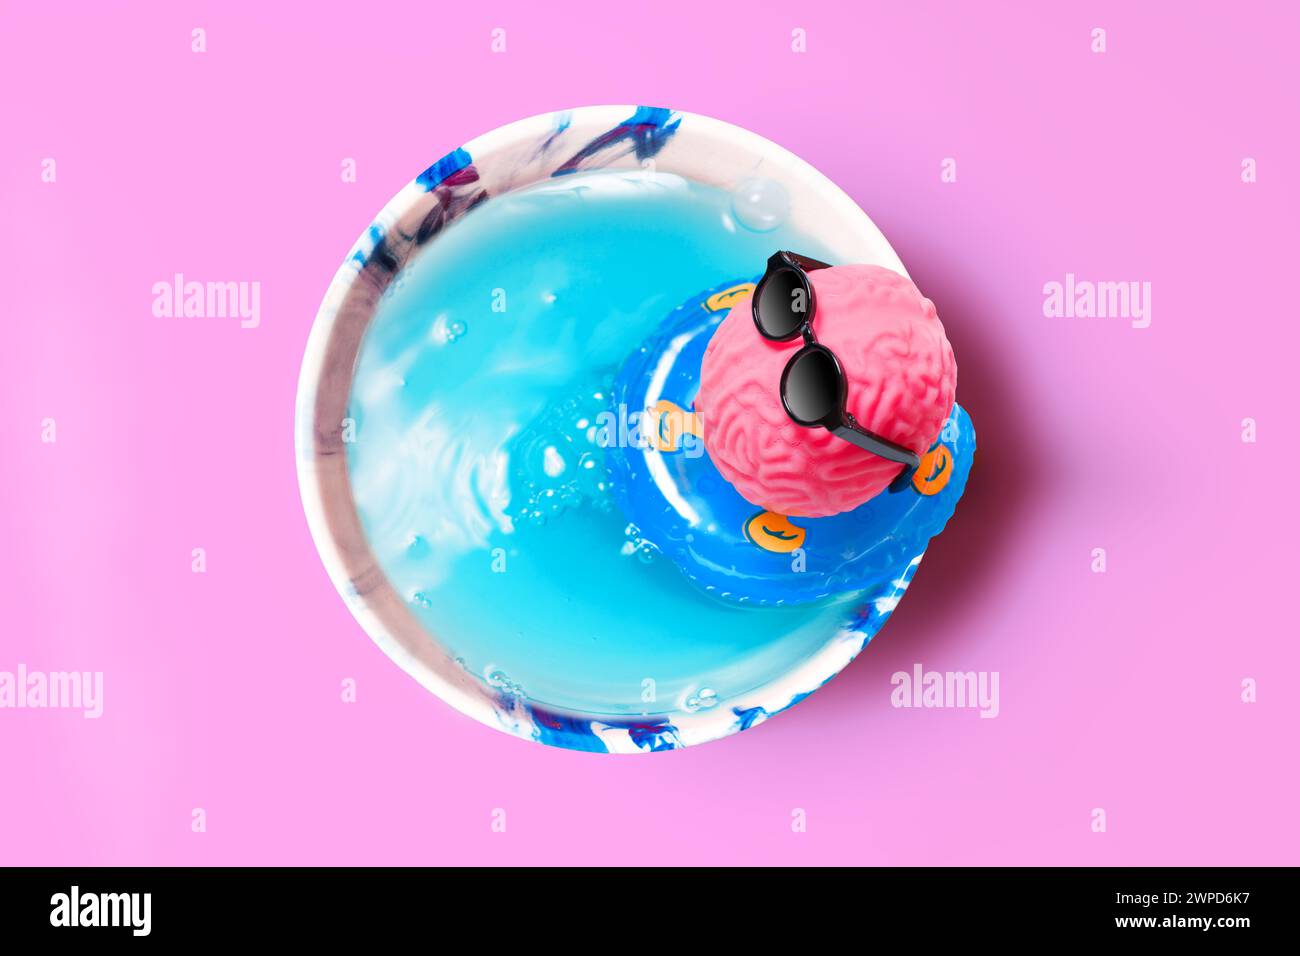 Makeshift oasis inside a cup, where a pink brain, sporting sunglasses, relaxes on an inflatable ring. Creativity, leisure and imaginative escape conce Stock Photo